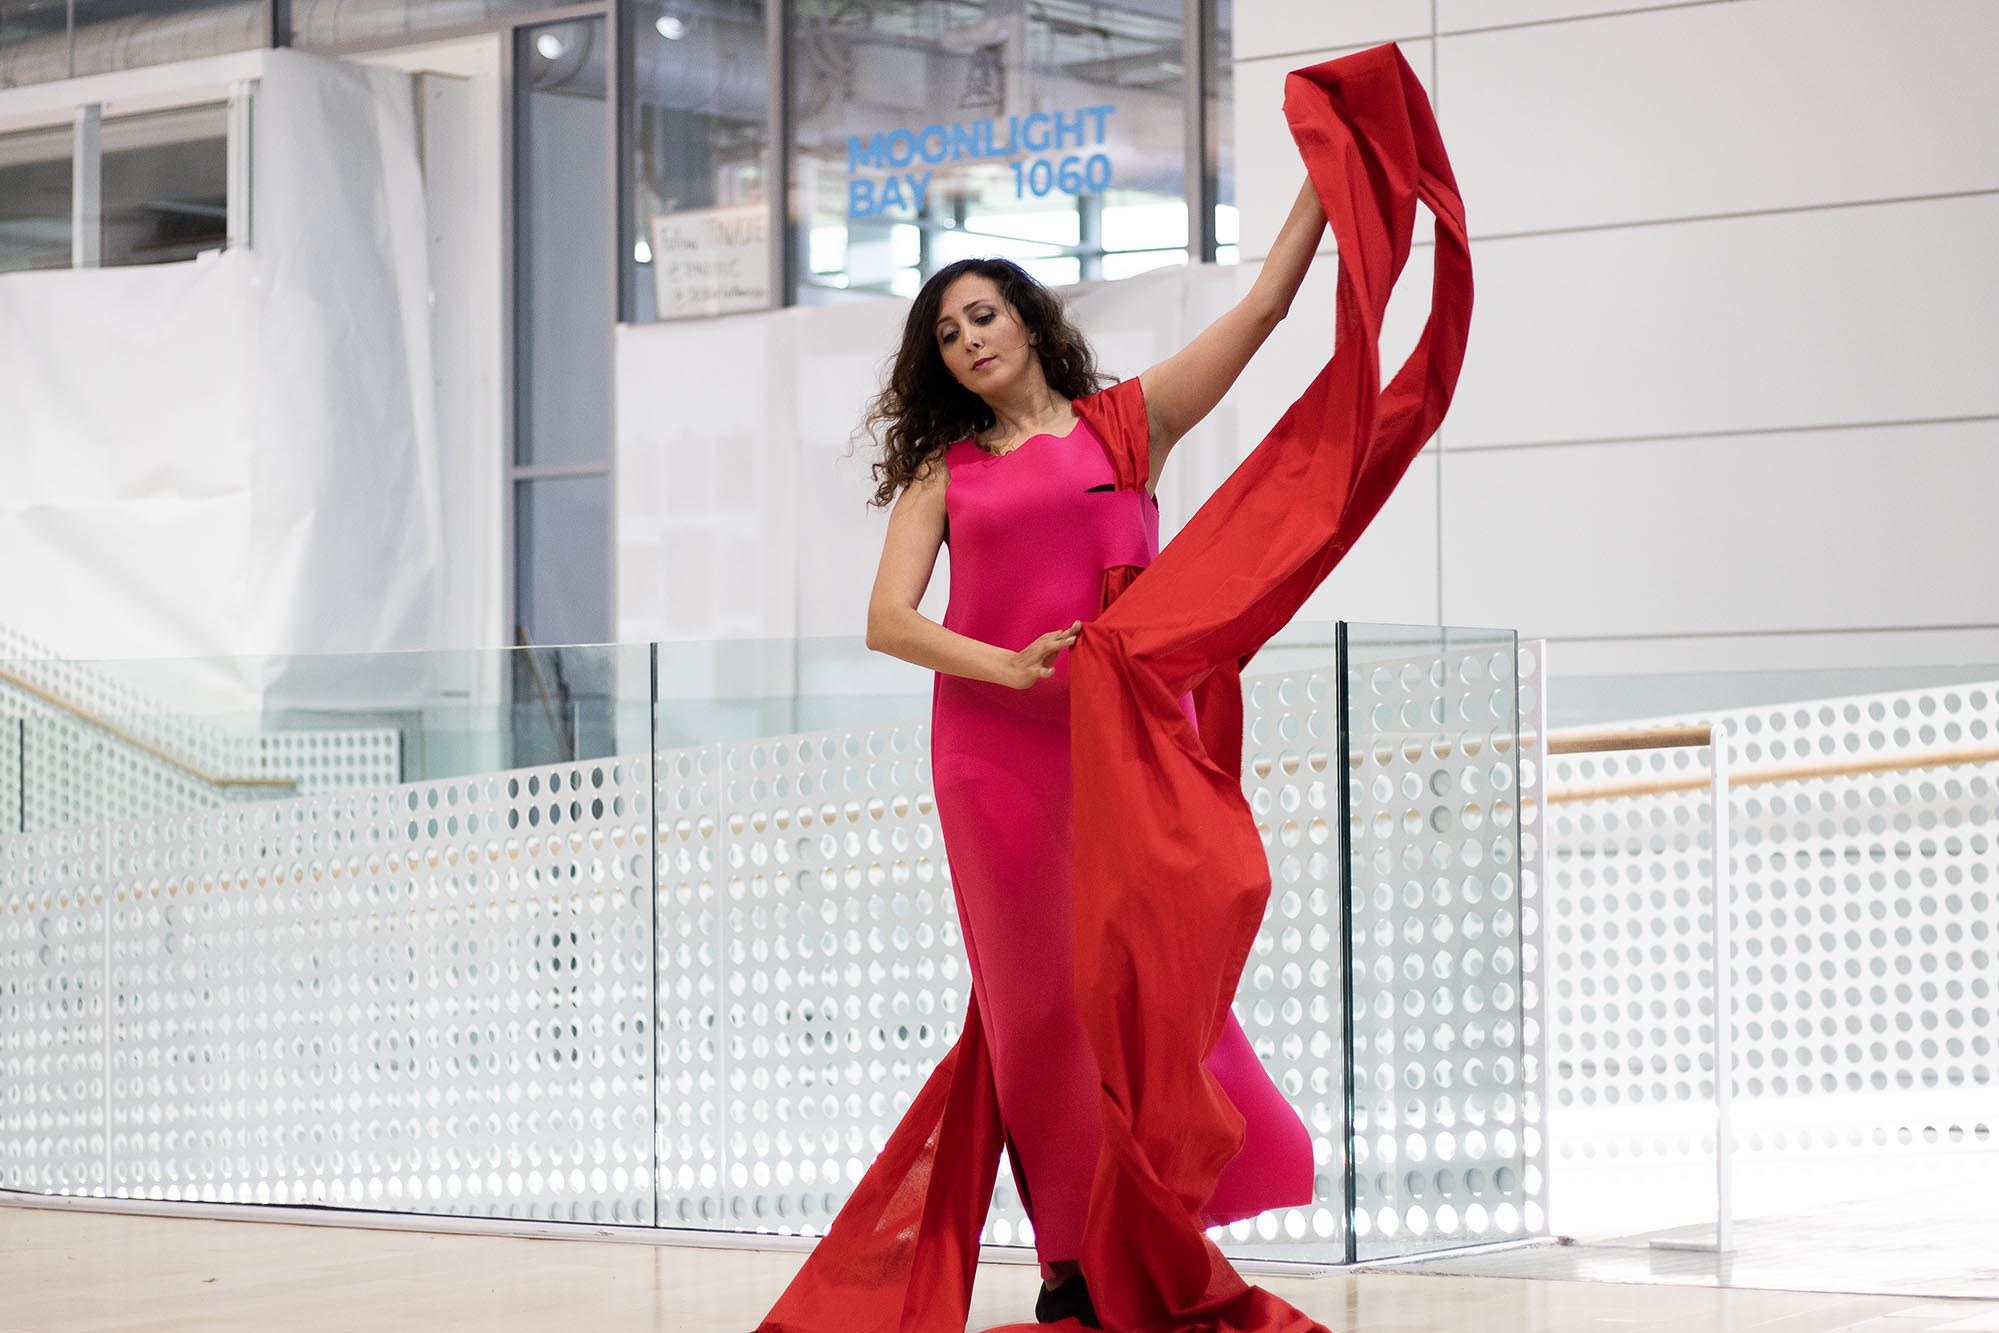 Re-Fashioned 2023. Model Banafsheh wears a long, hot pink dress with a red fabric train that comes over her shoulder. Her left arm holds the red fabric up in the air. Designed by Natalia Espinel-Porras.